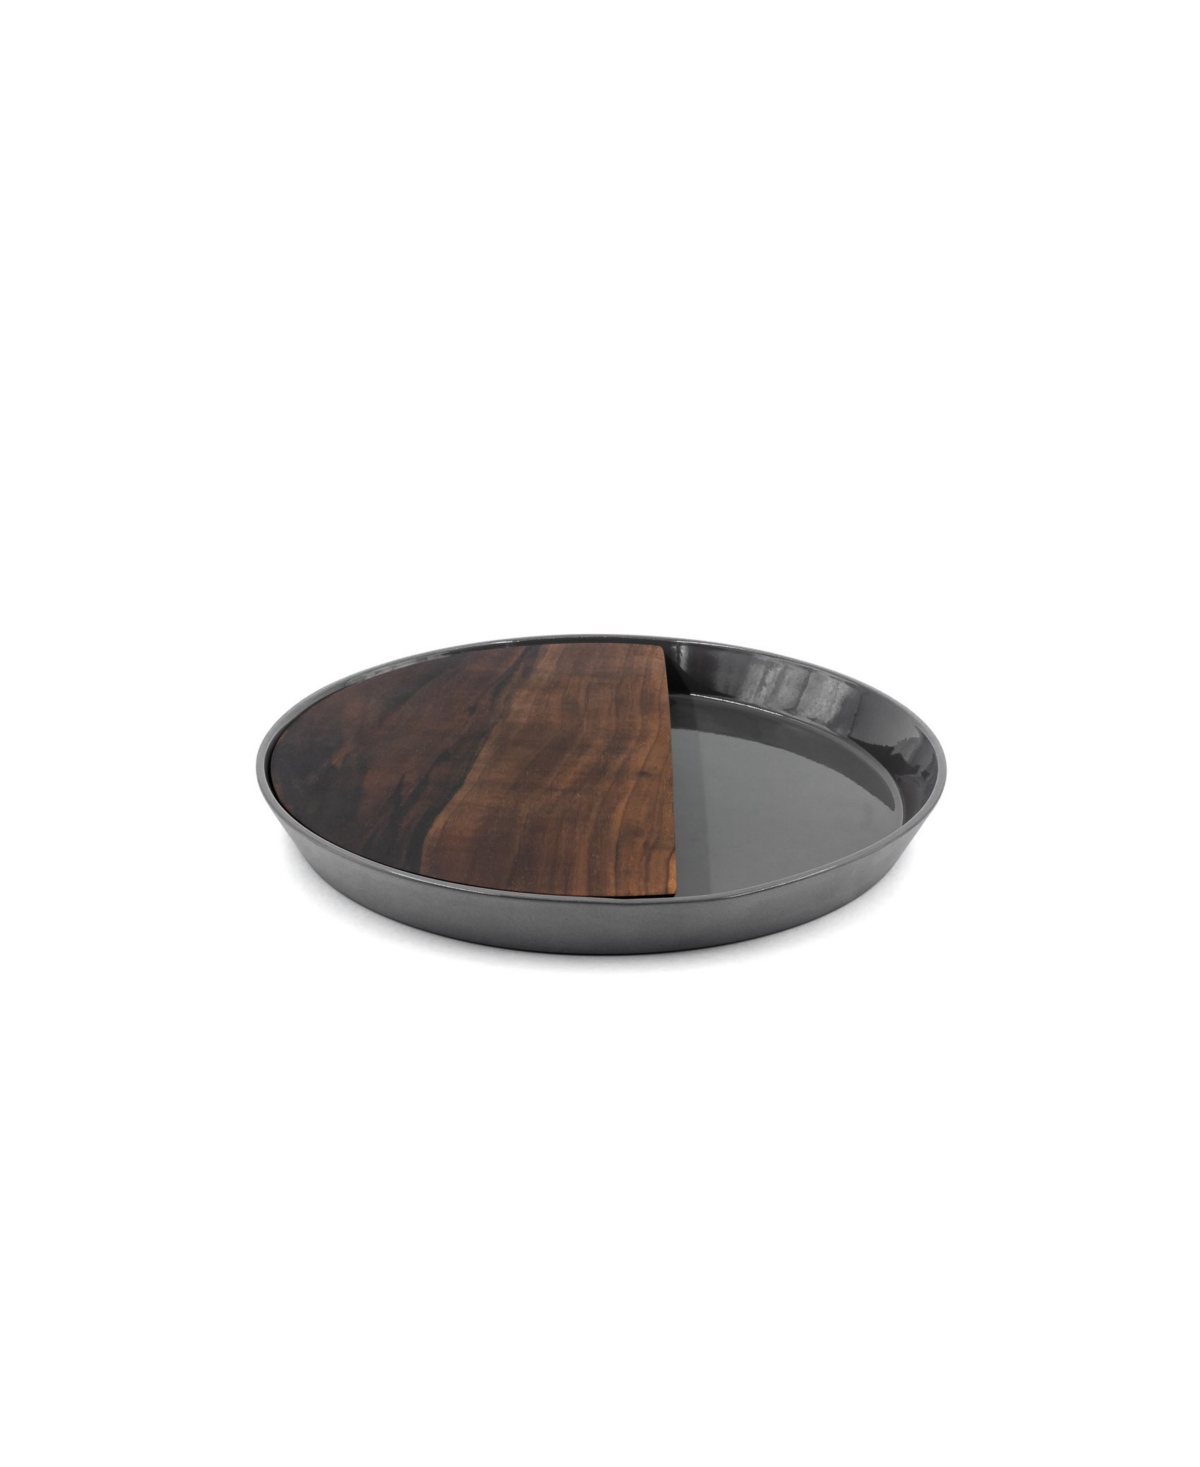 10508326 Bomshbee Eclipse Round Serving Platter with Wood B sku 10508326